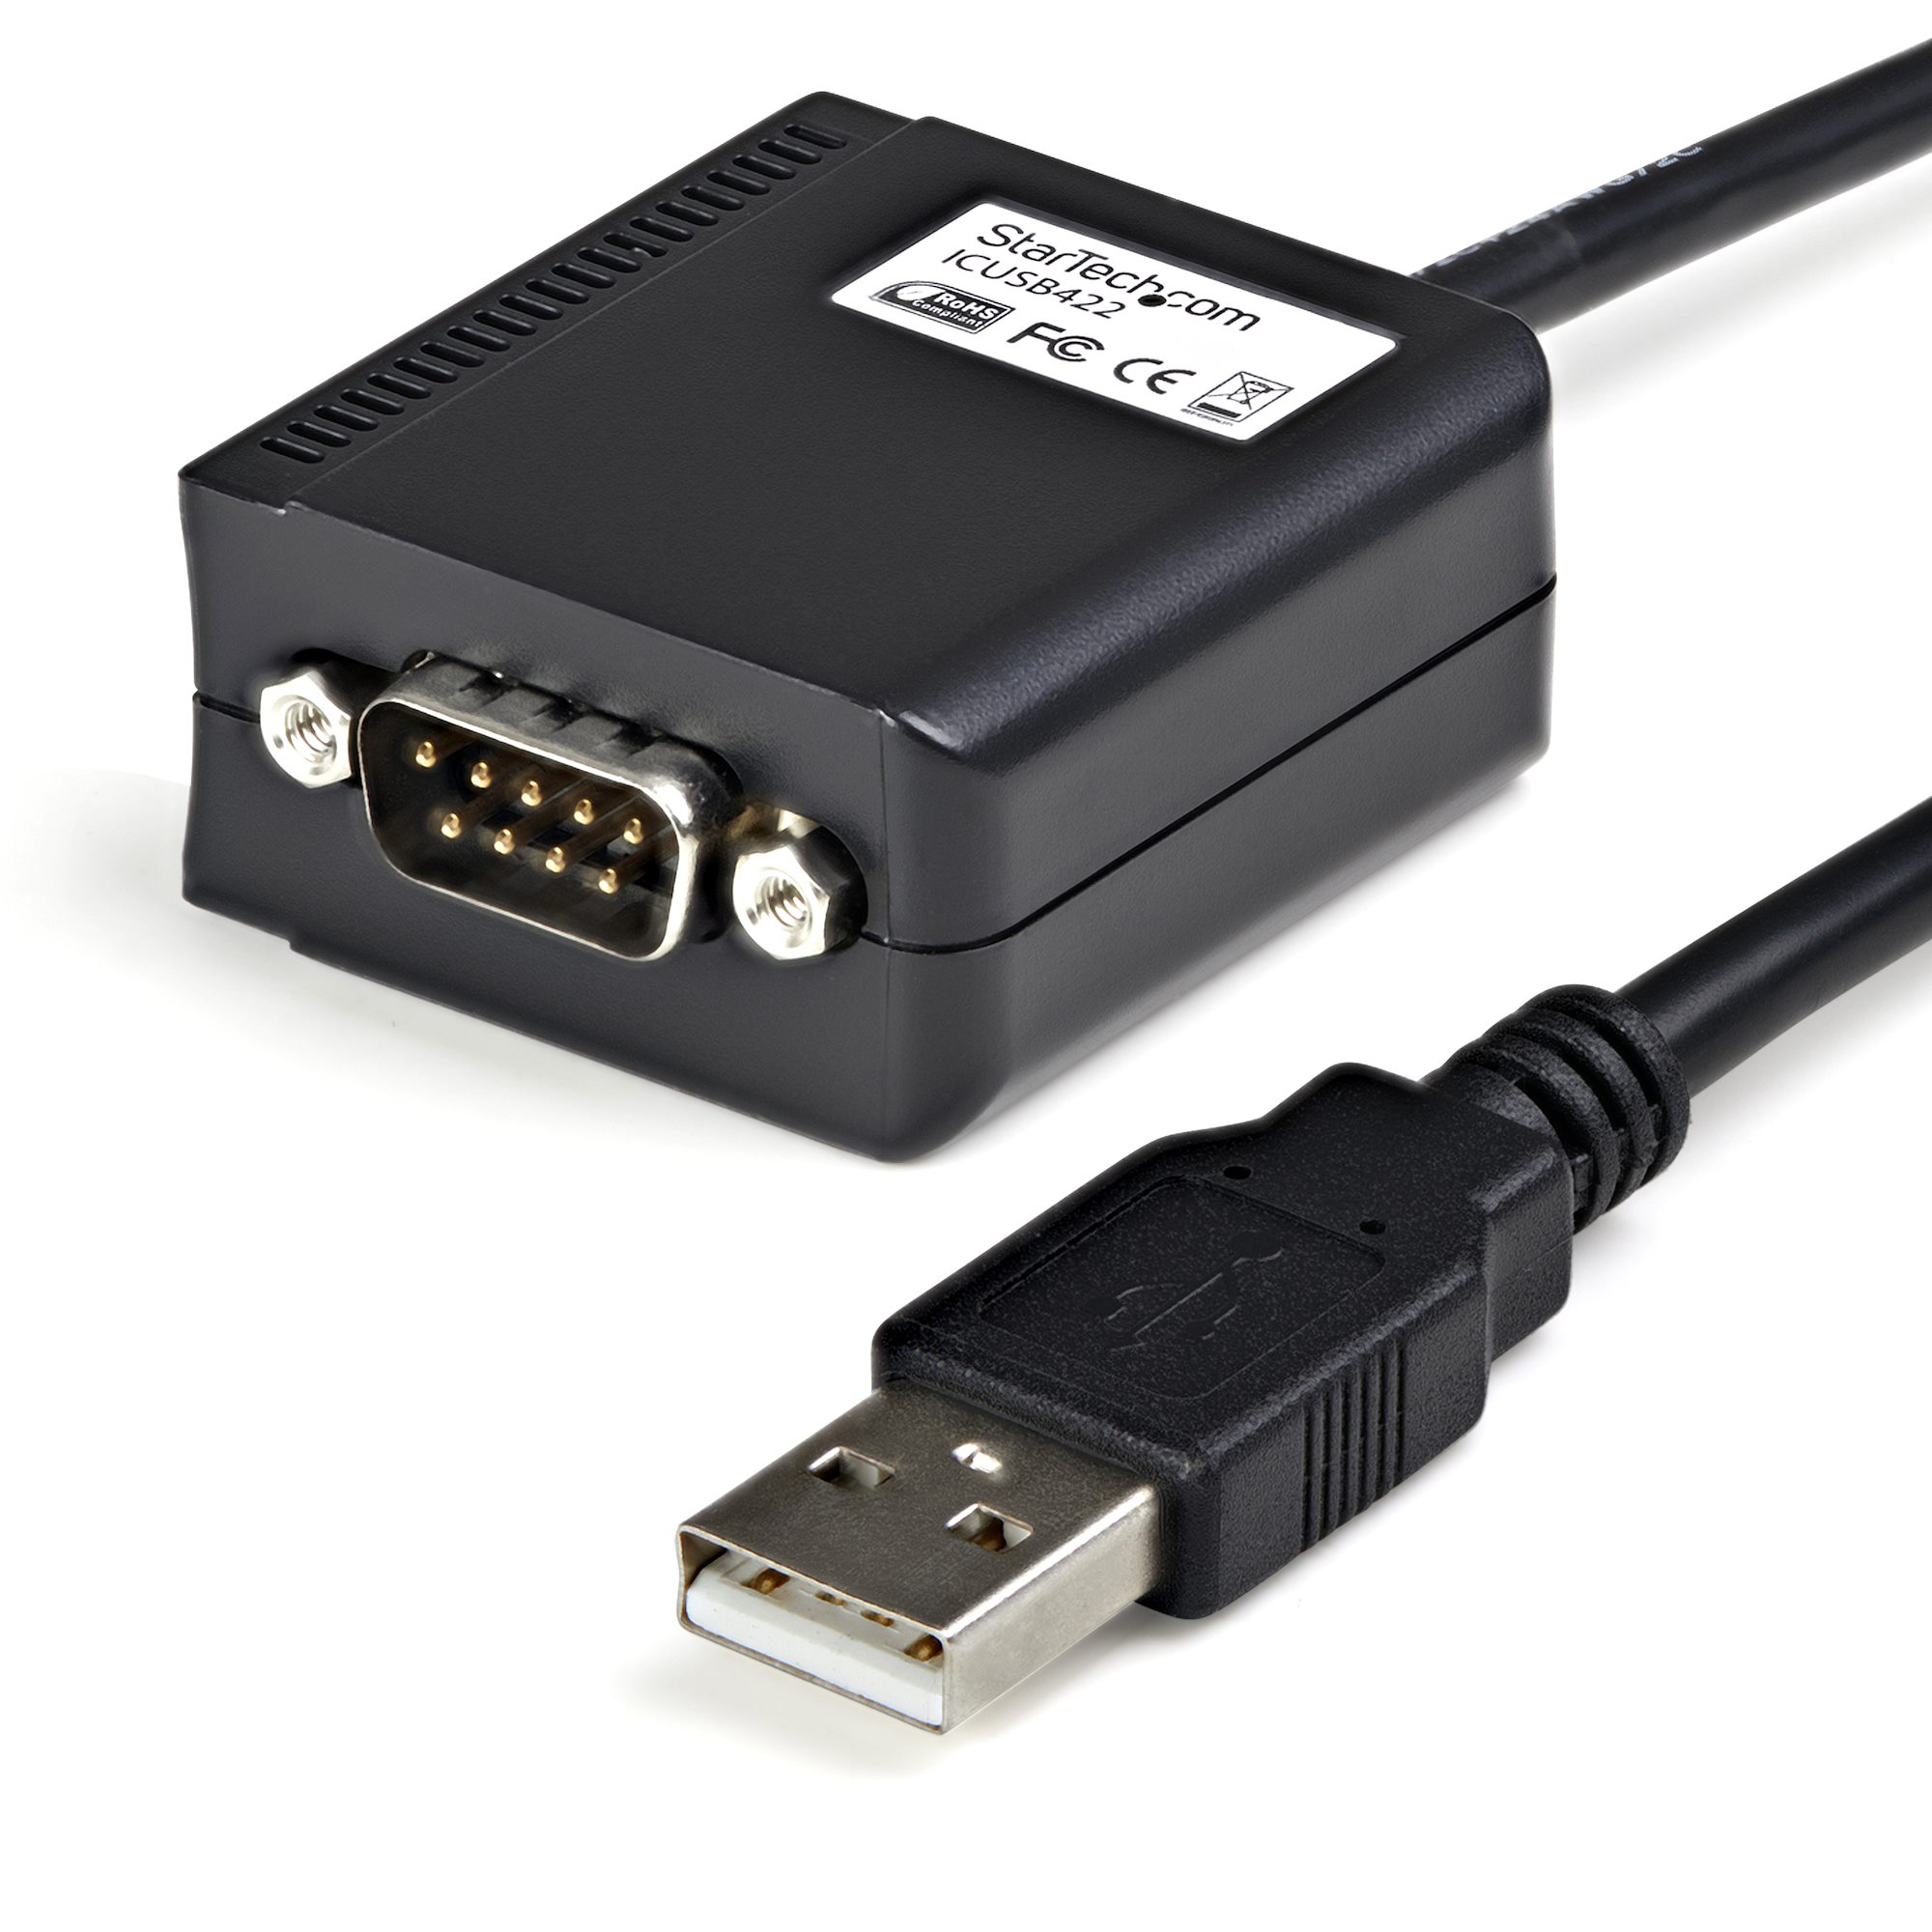 USB to Serial Adapter Port RS232 RS422 RS485 COM Port 